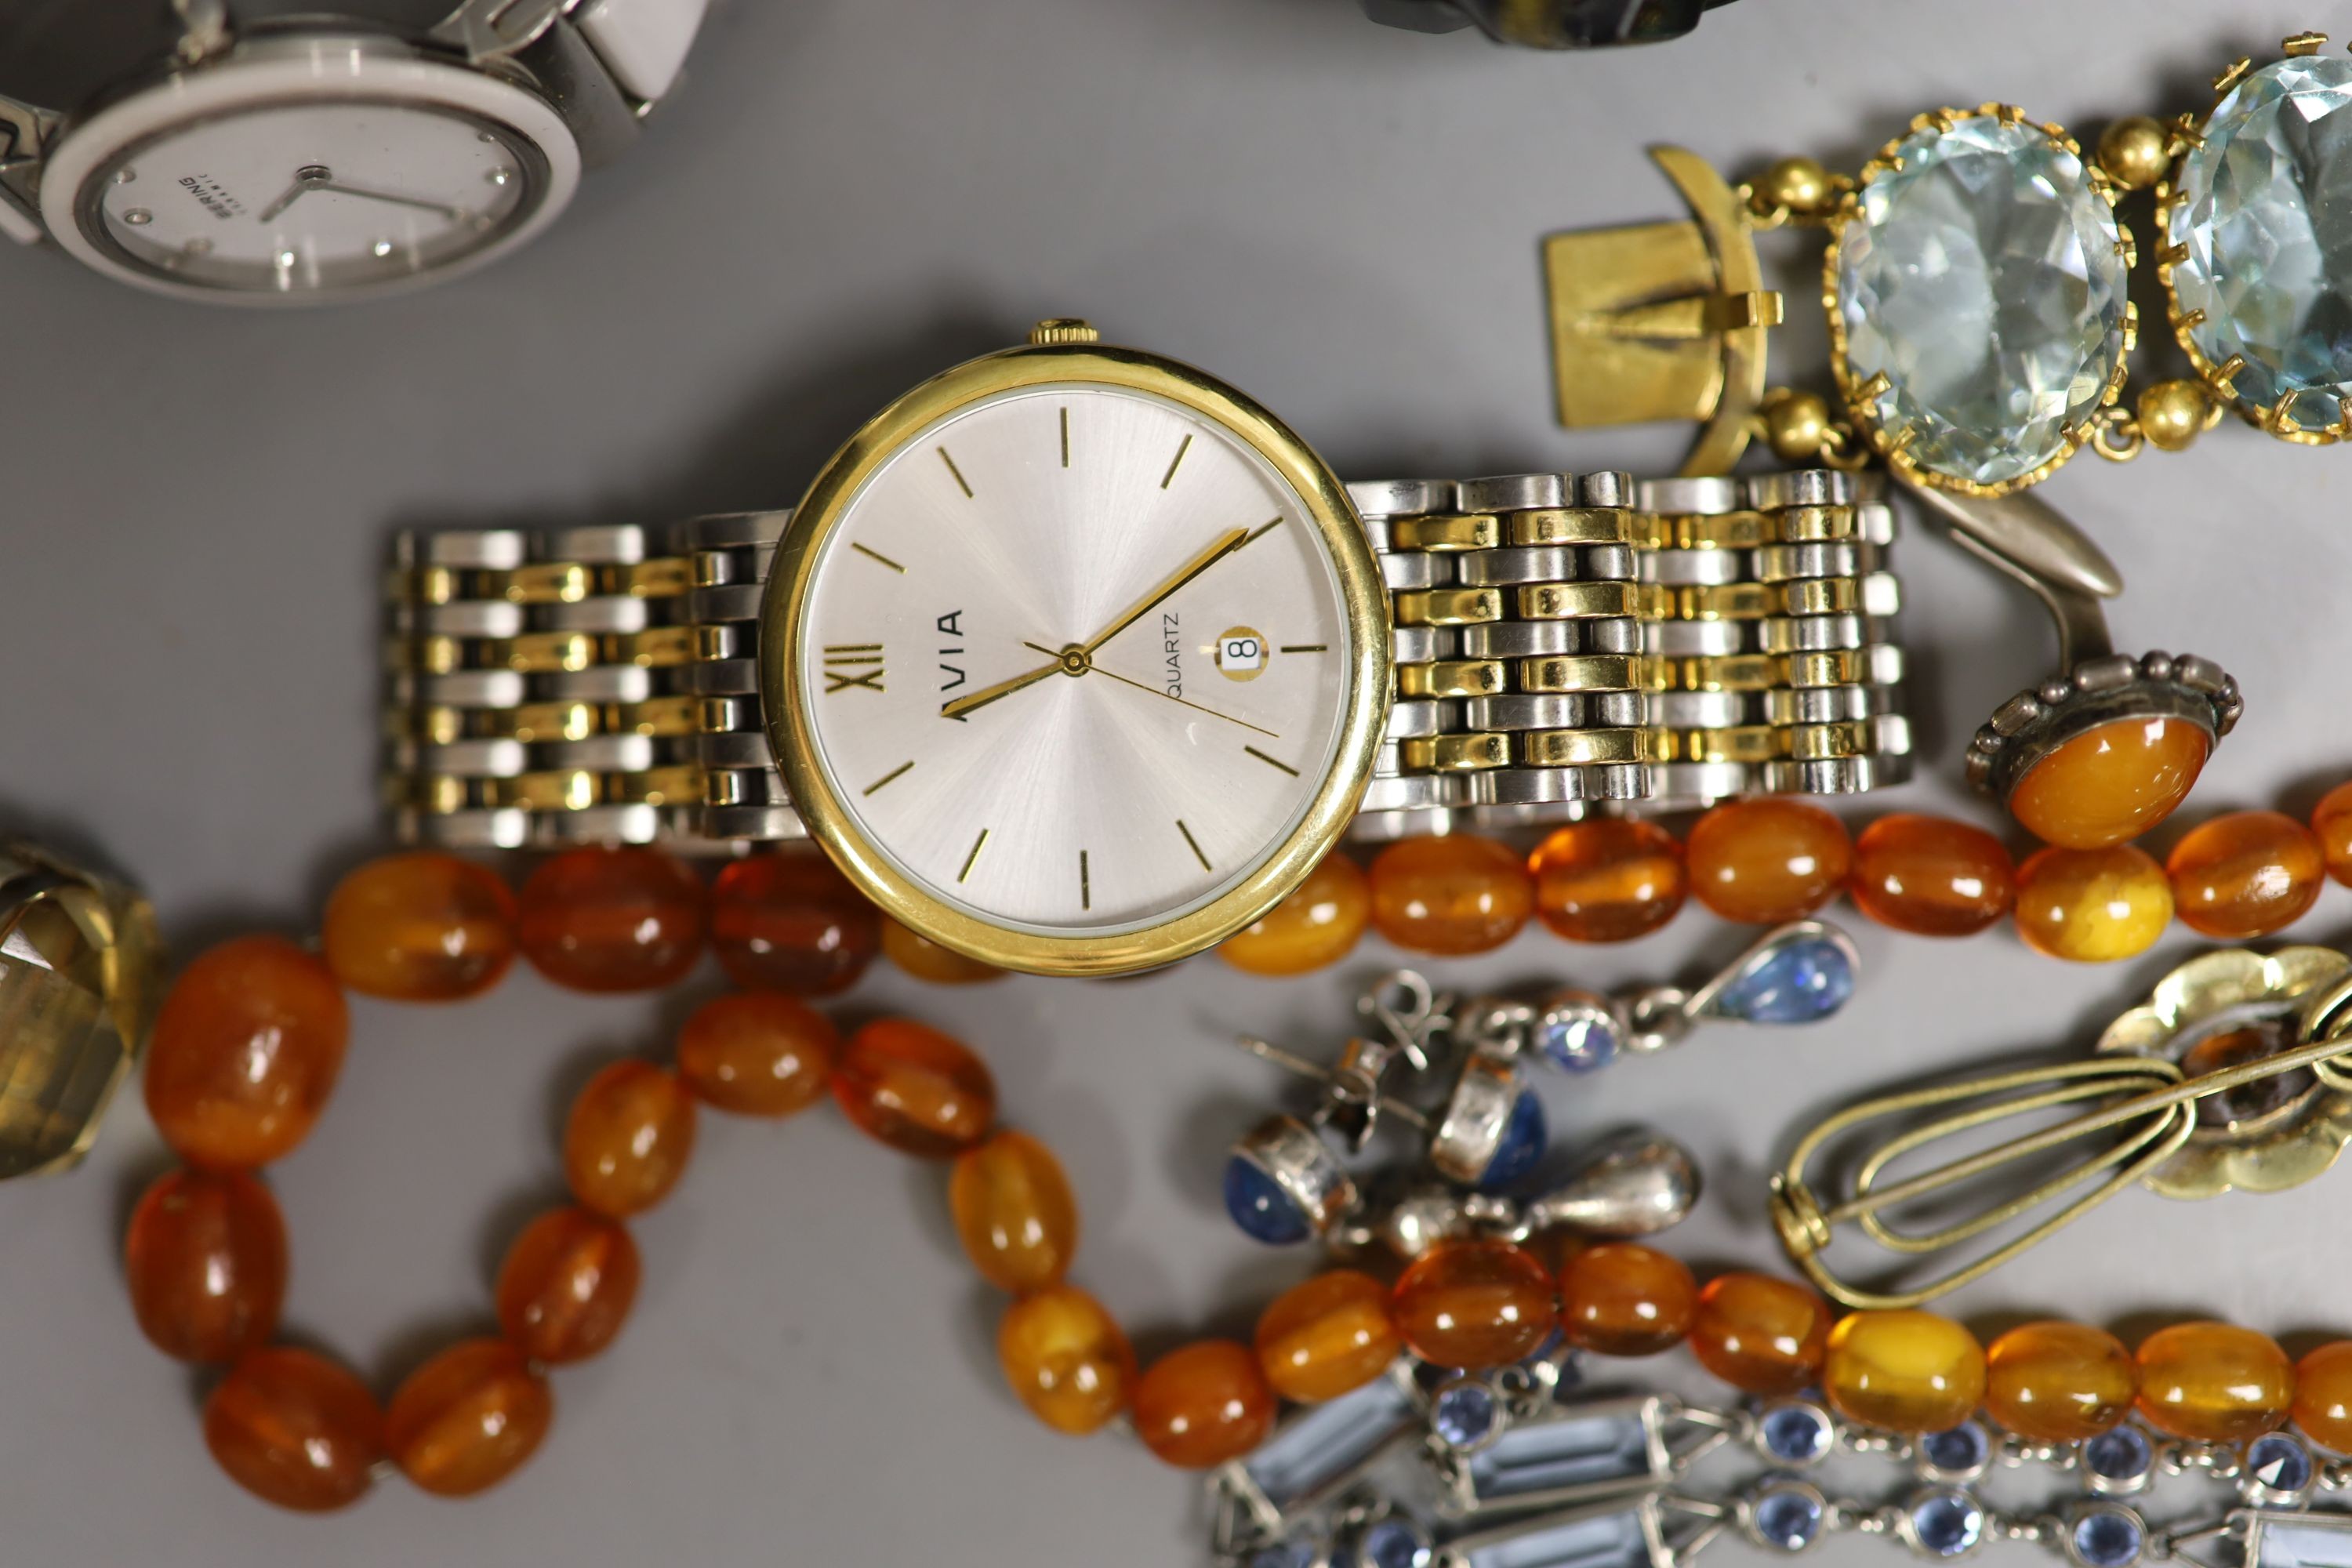 An amber necklace, costume jewellery, watches, etc.